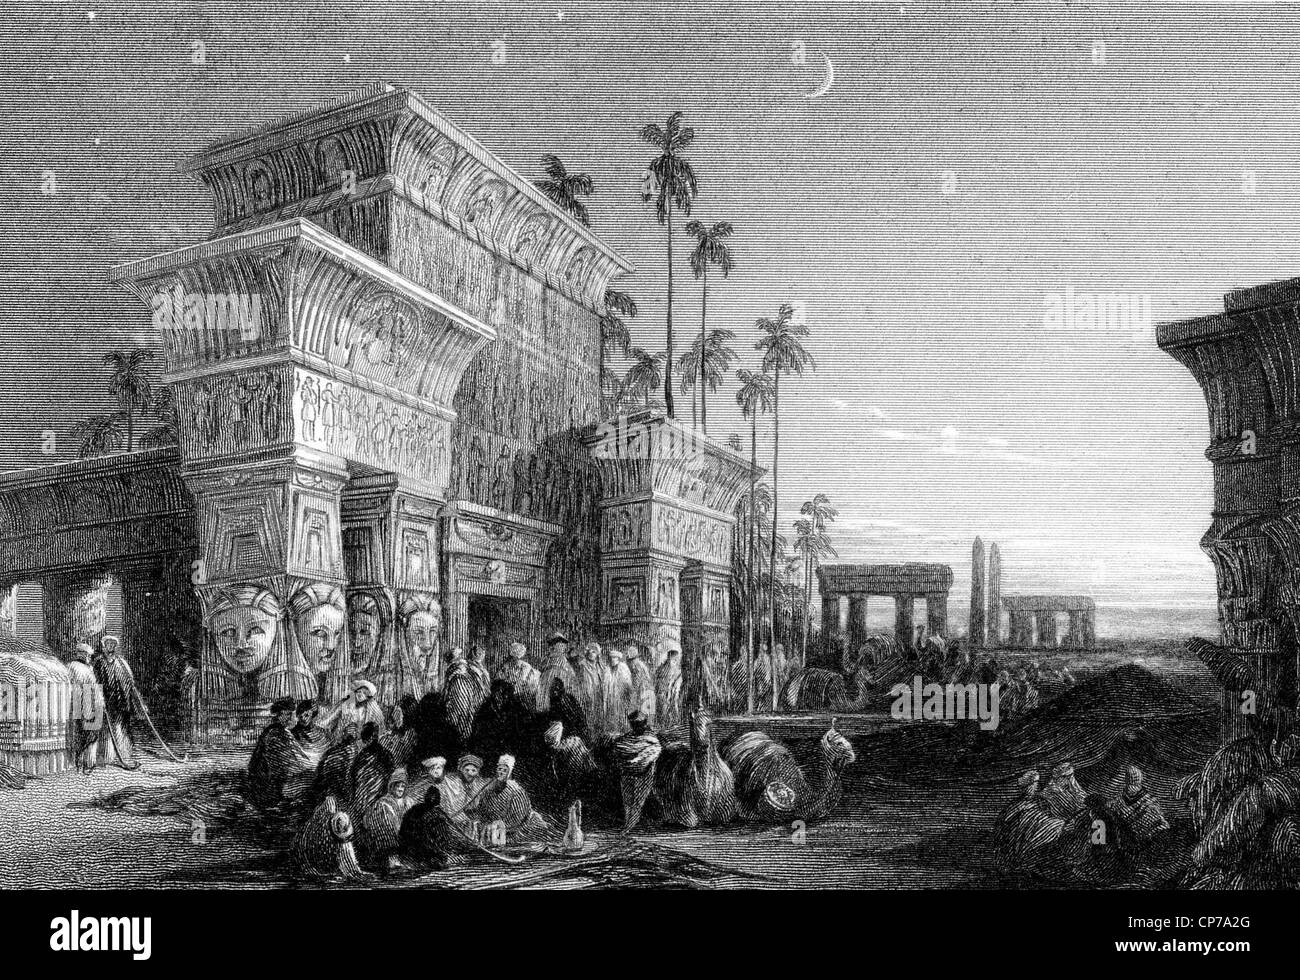 Crowd of Arabs in desert with ancient Egyptian buildings in background under starry sky. Stock Photo